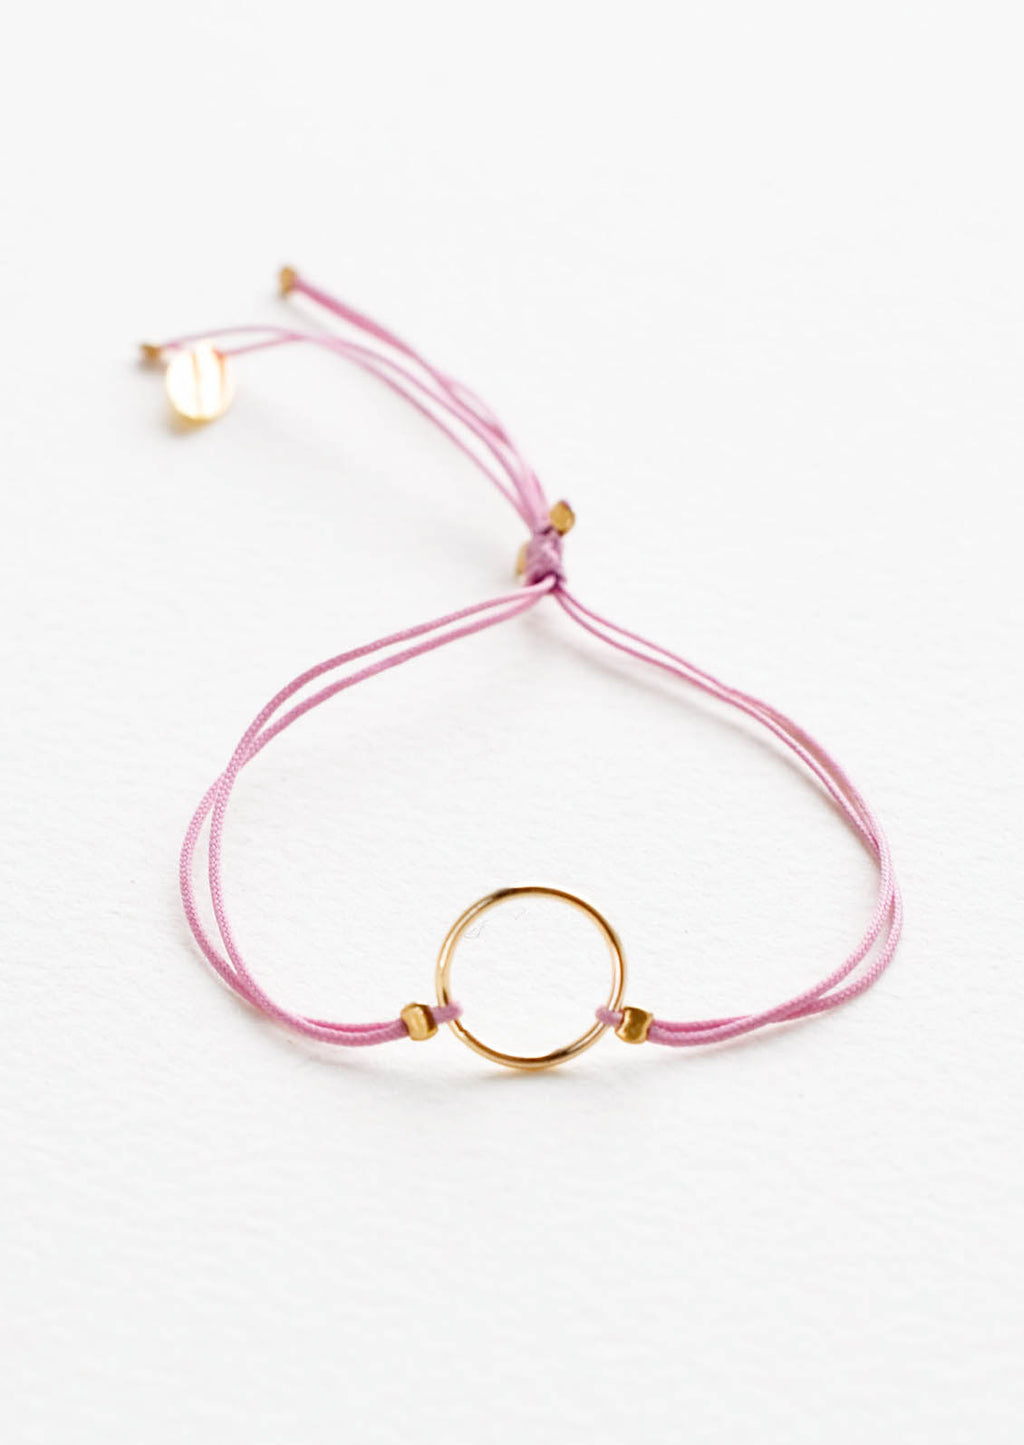 Orchid: Bracelet with yellow gold circle charm centered on an adjustable purple string.